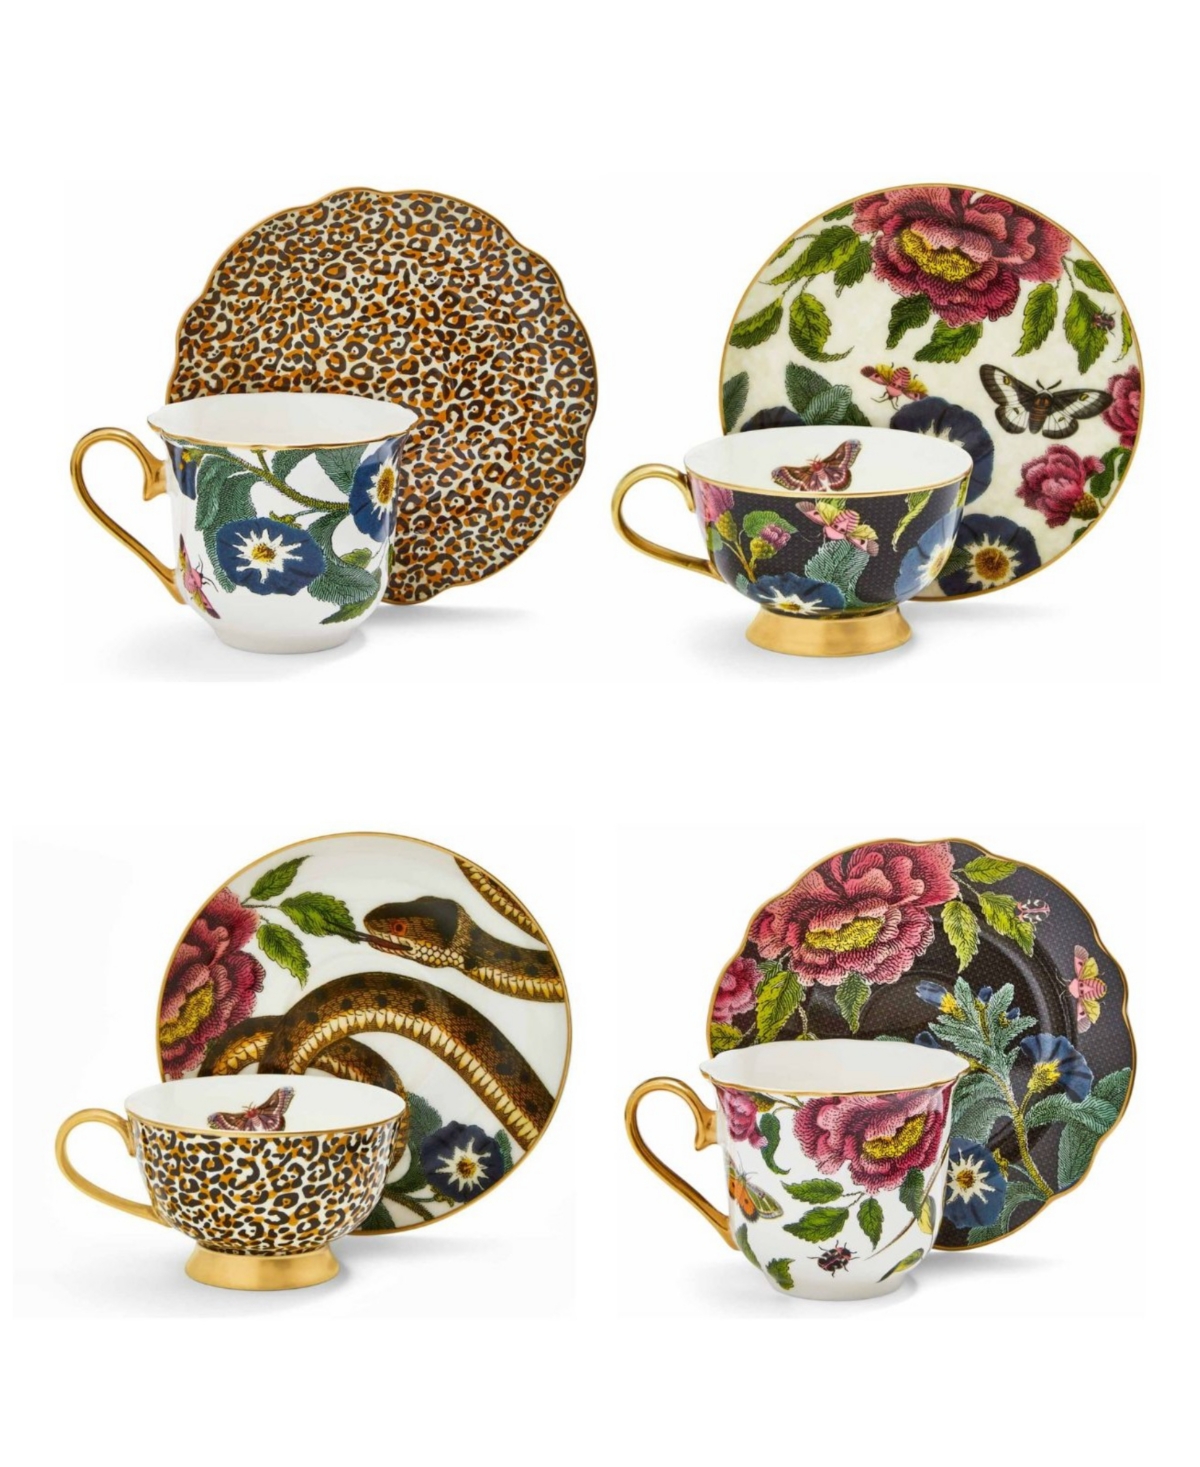 Creatures of Curiosity Set of 4 Teacups and Saucers - Assorted